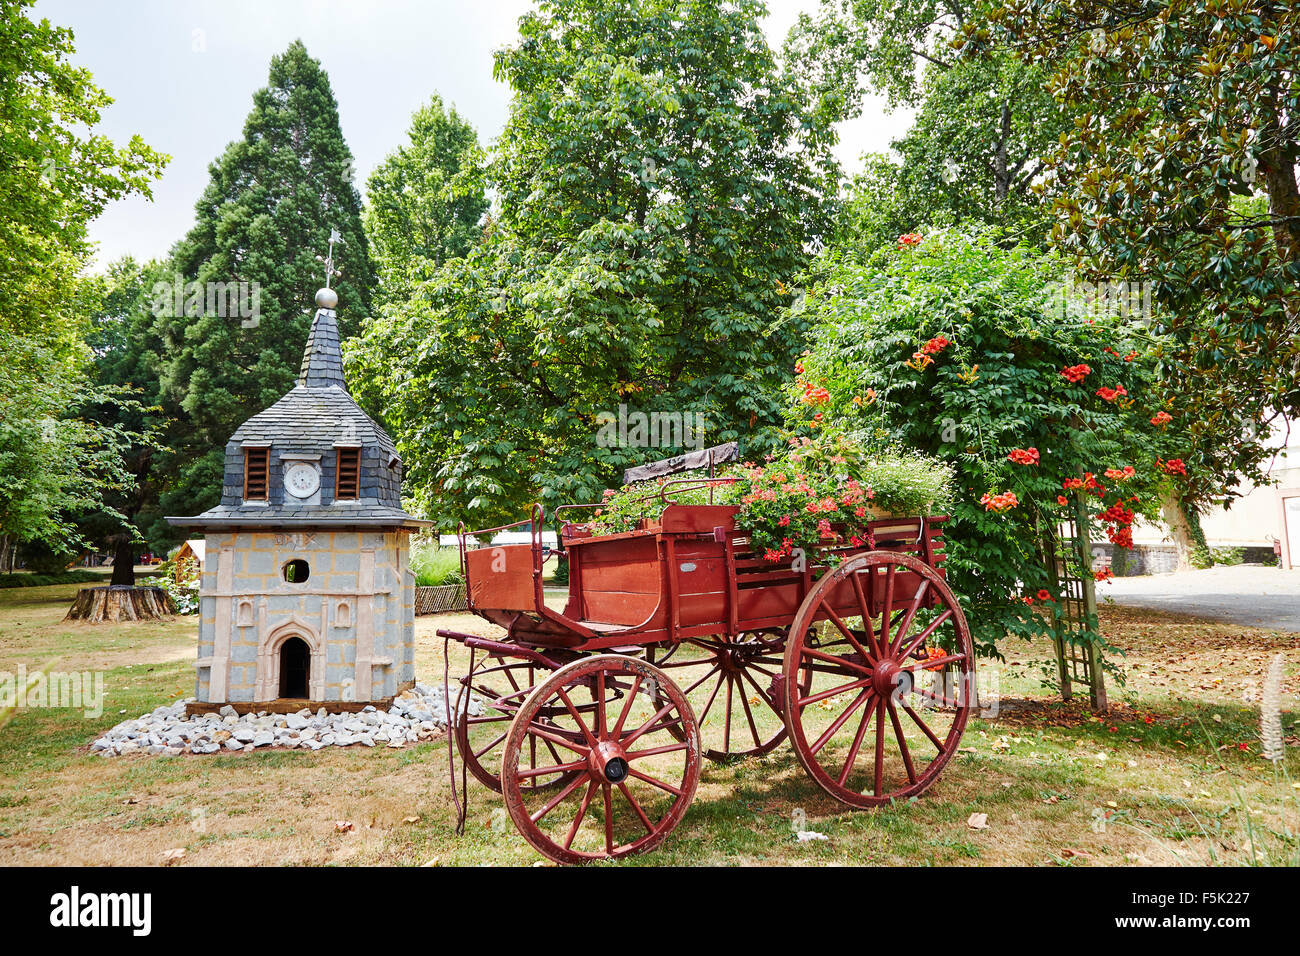 Decorative old cart and model of the church in a park in Objat, Limousin, Correze, France. Stock Photo